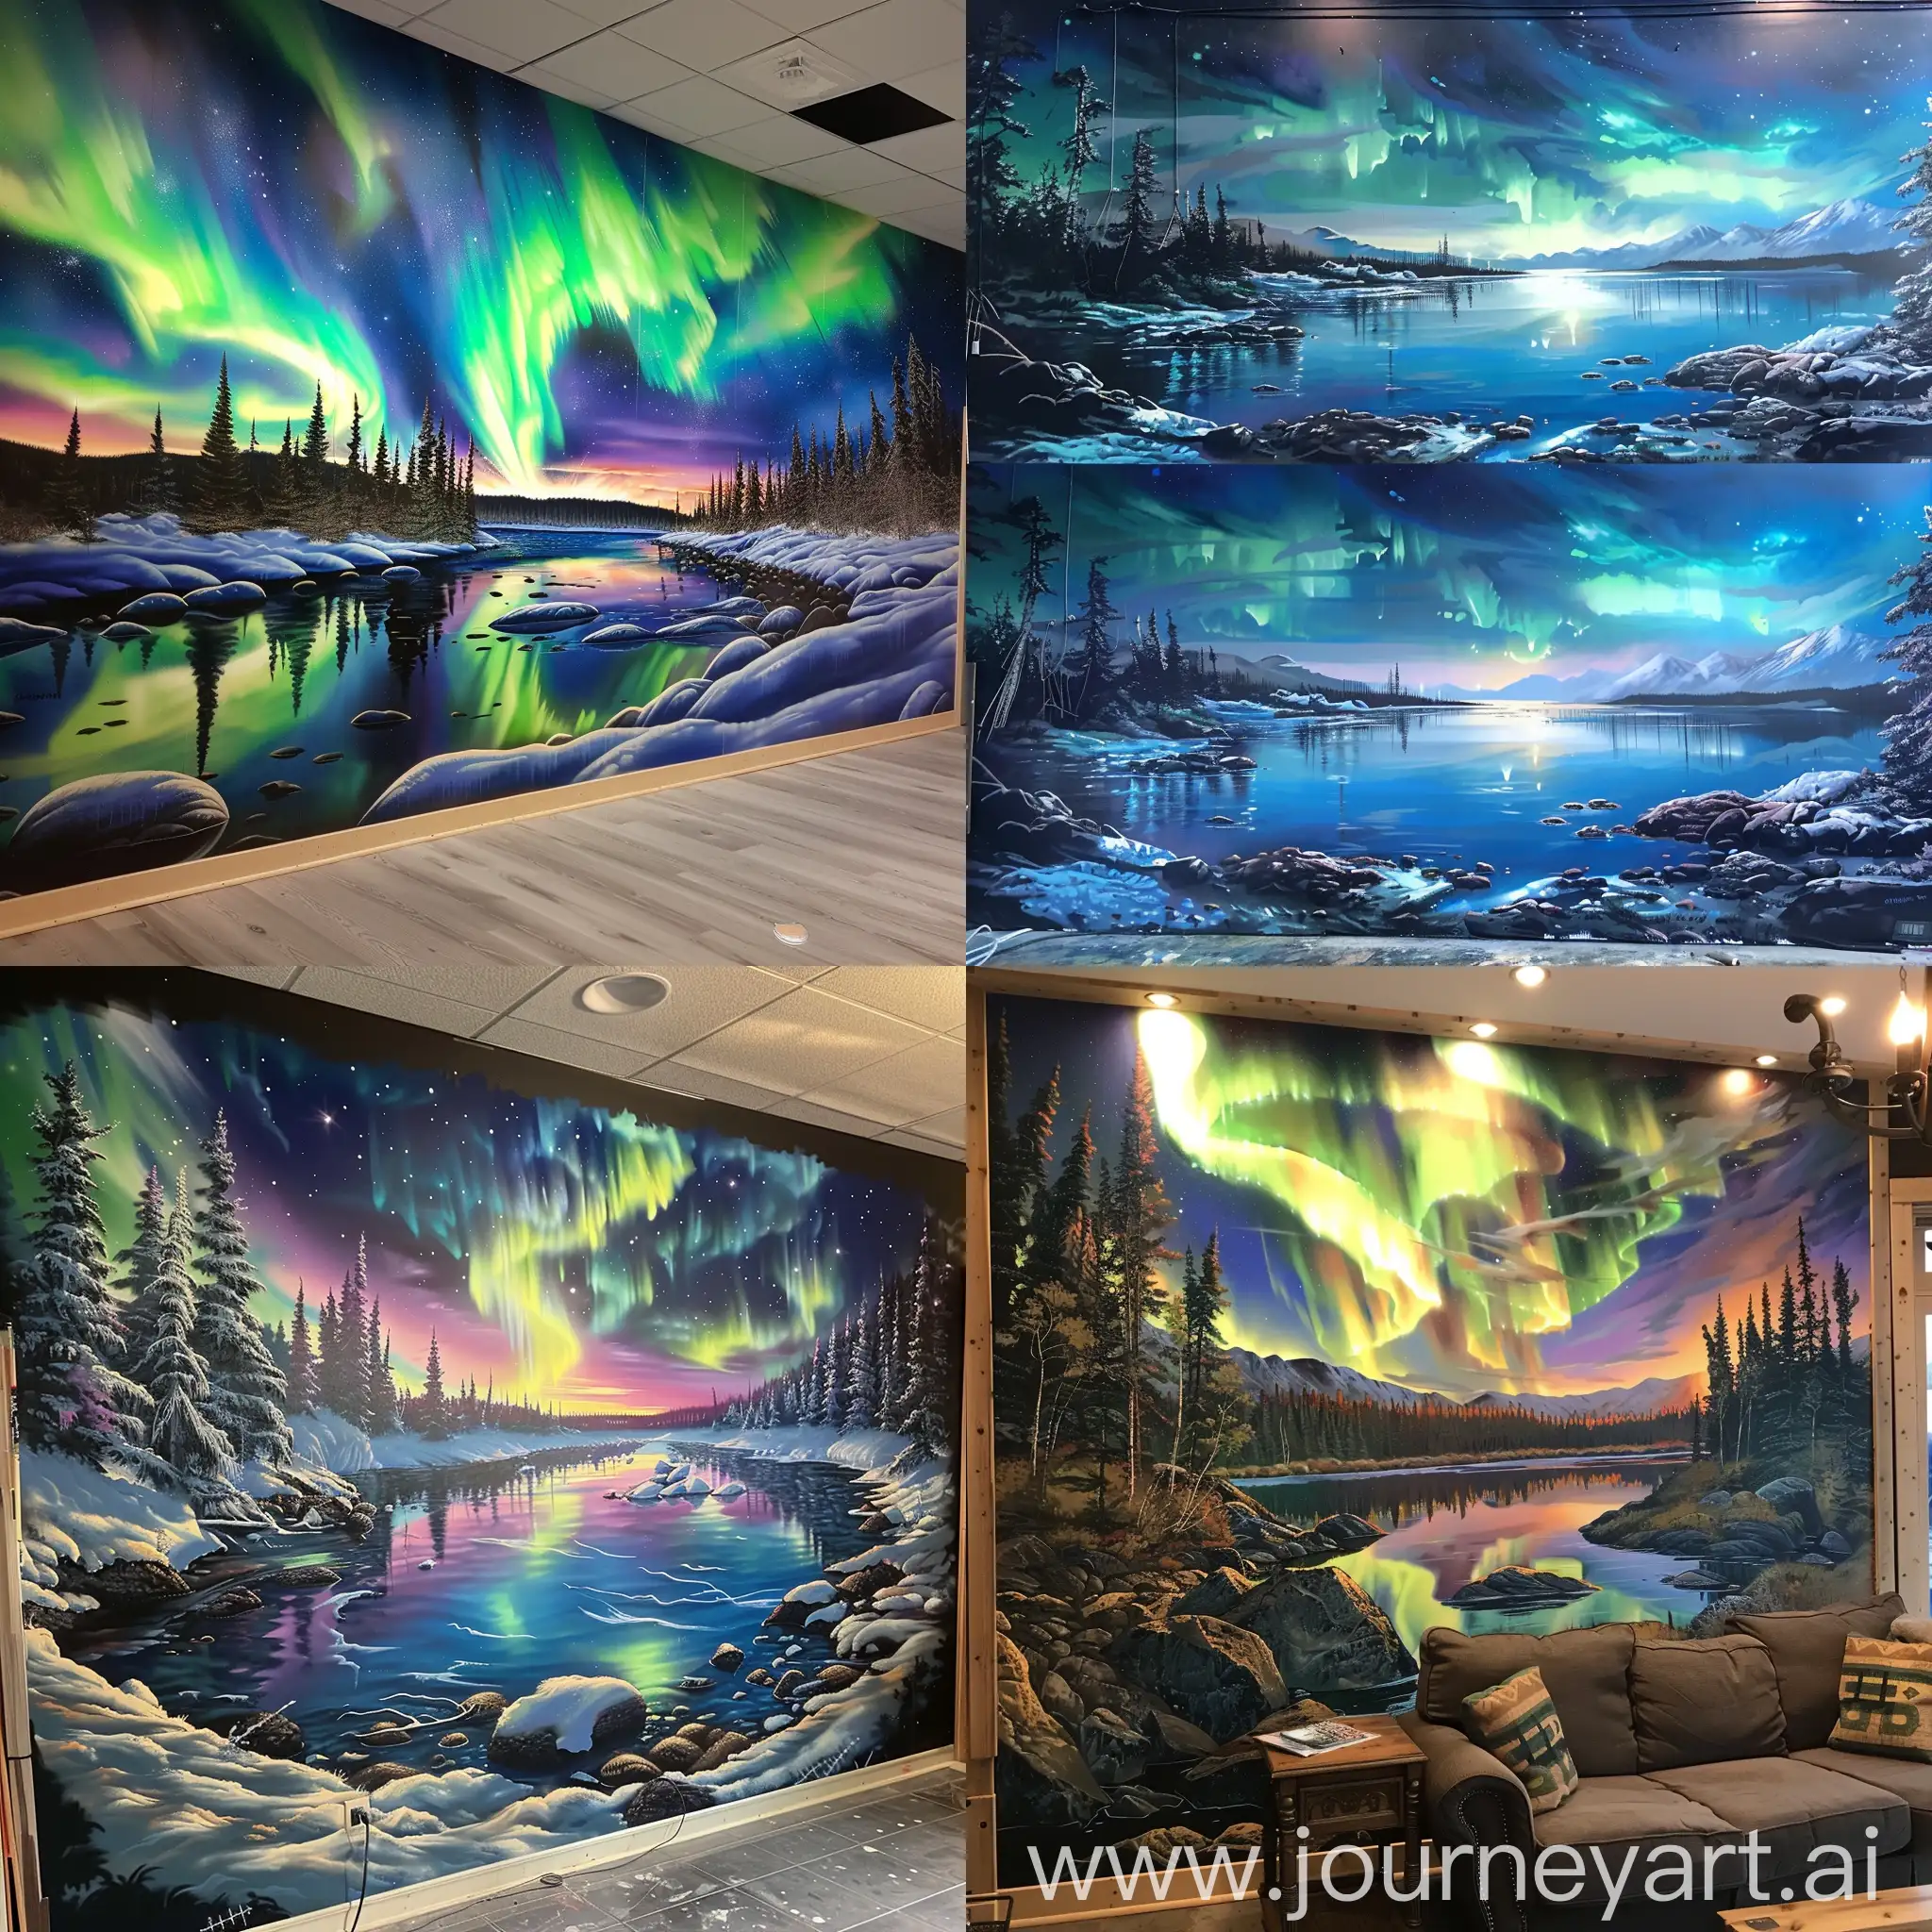 30ft long mural of northern light and natural landscape